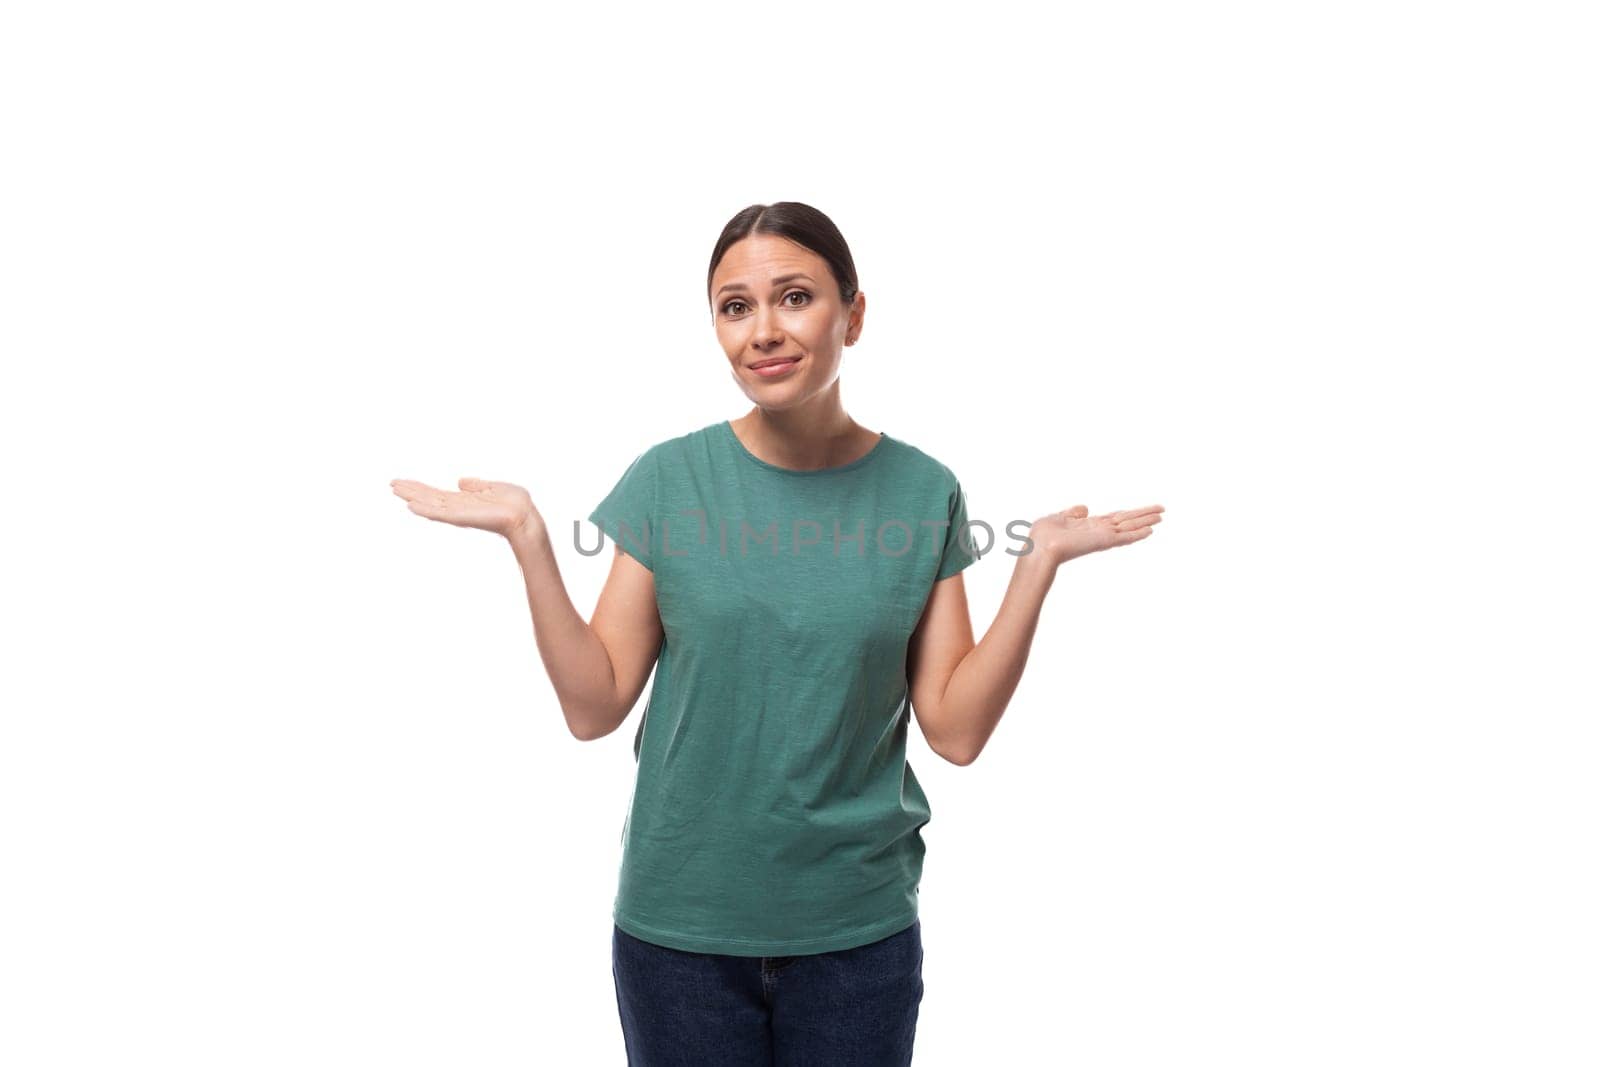 30 year old slender European brunette woman with ponytail hairstyle dressed in green t-shirt has doubts by TRMK